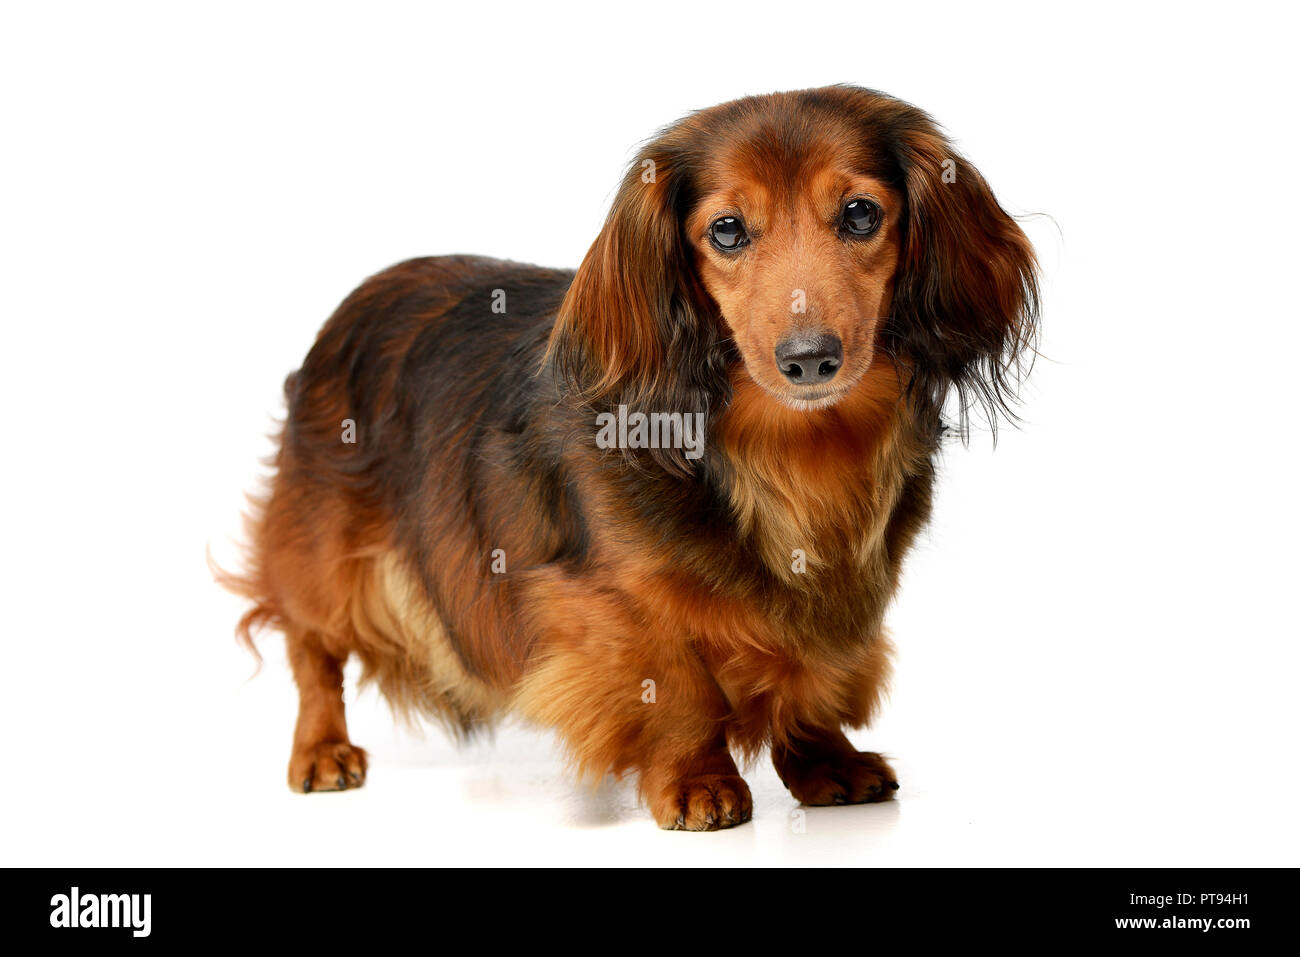 Studio shot of an adorable longhaired Dachshund standing on white background. Stock Photo